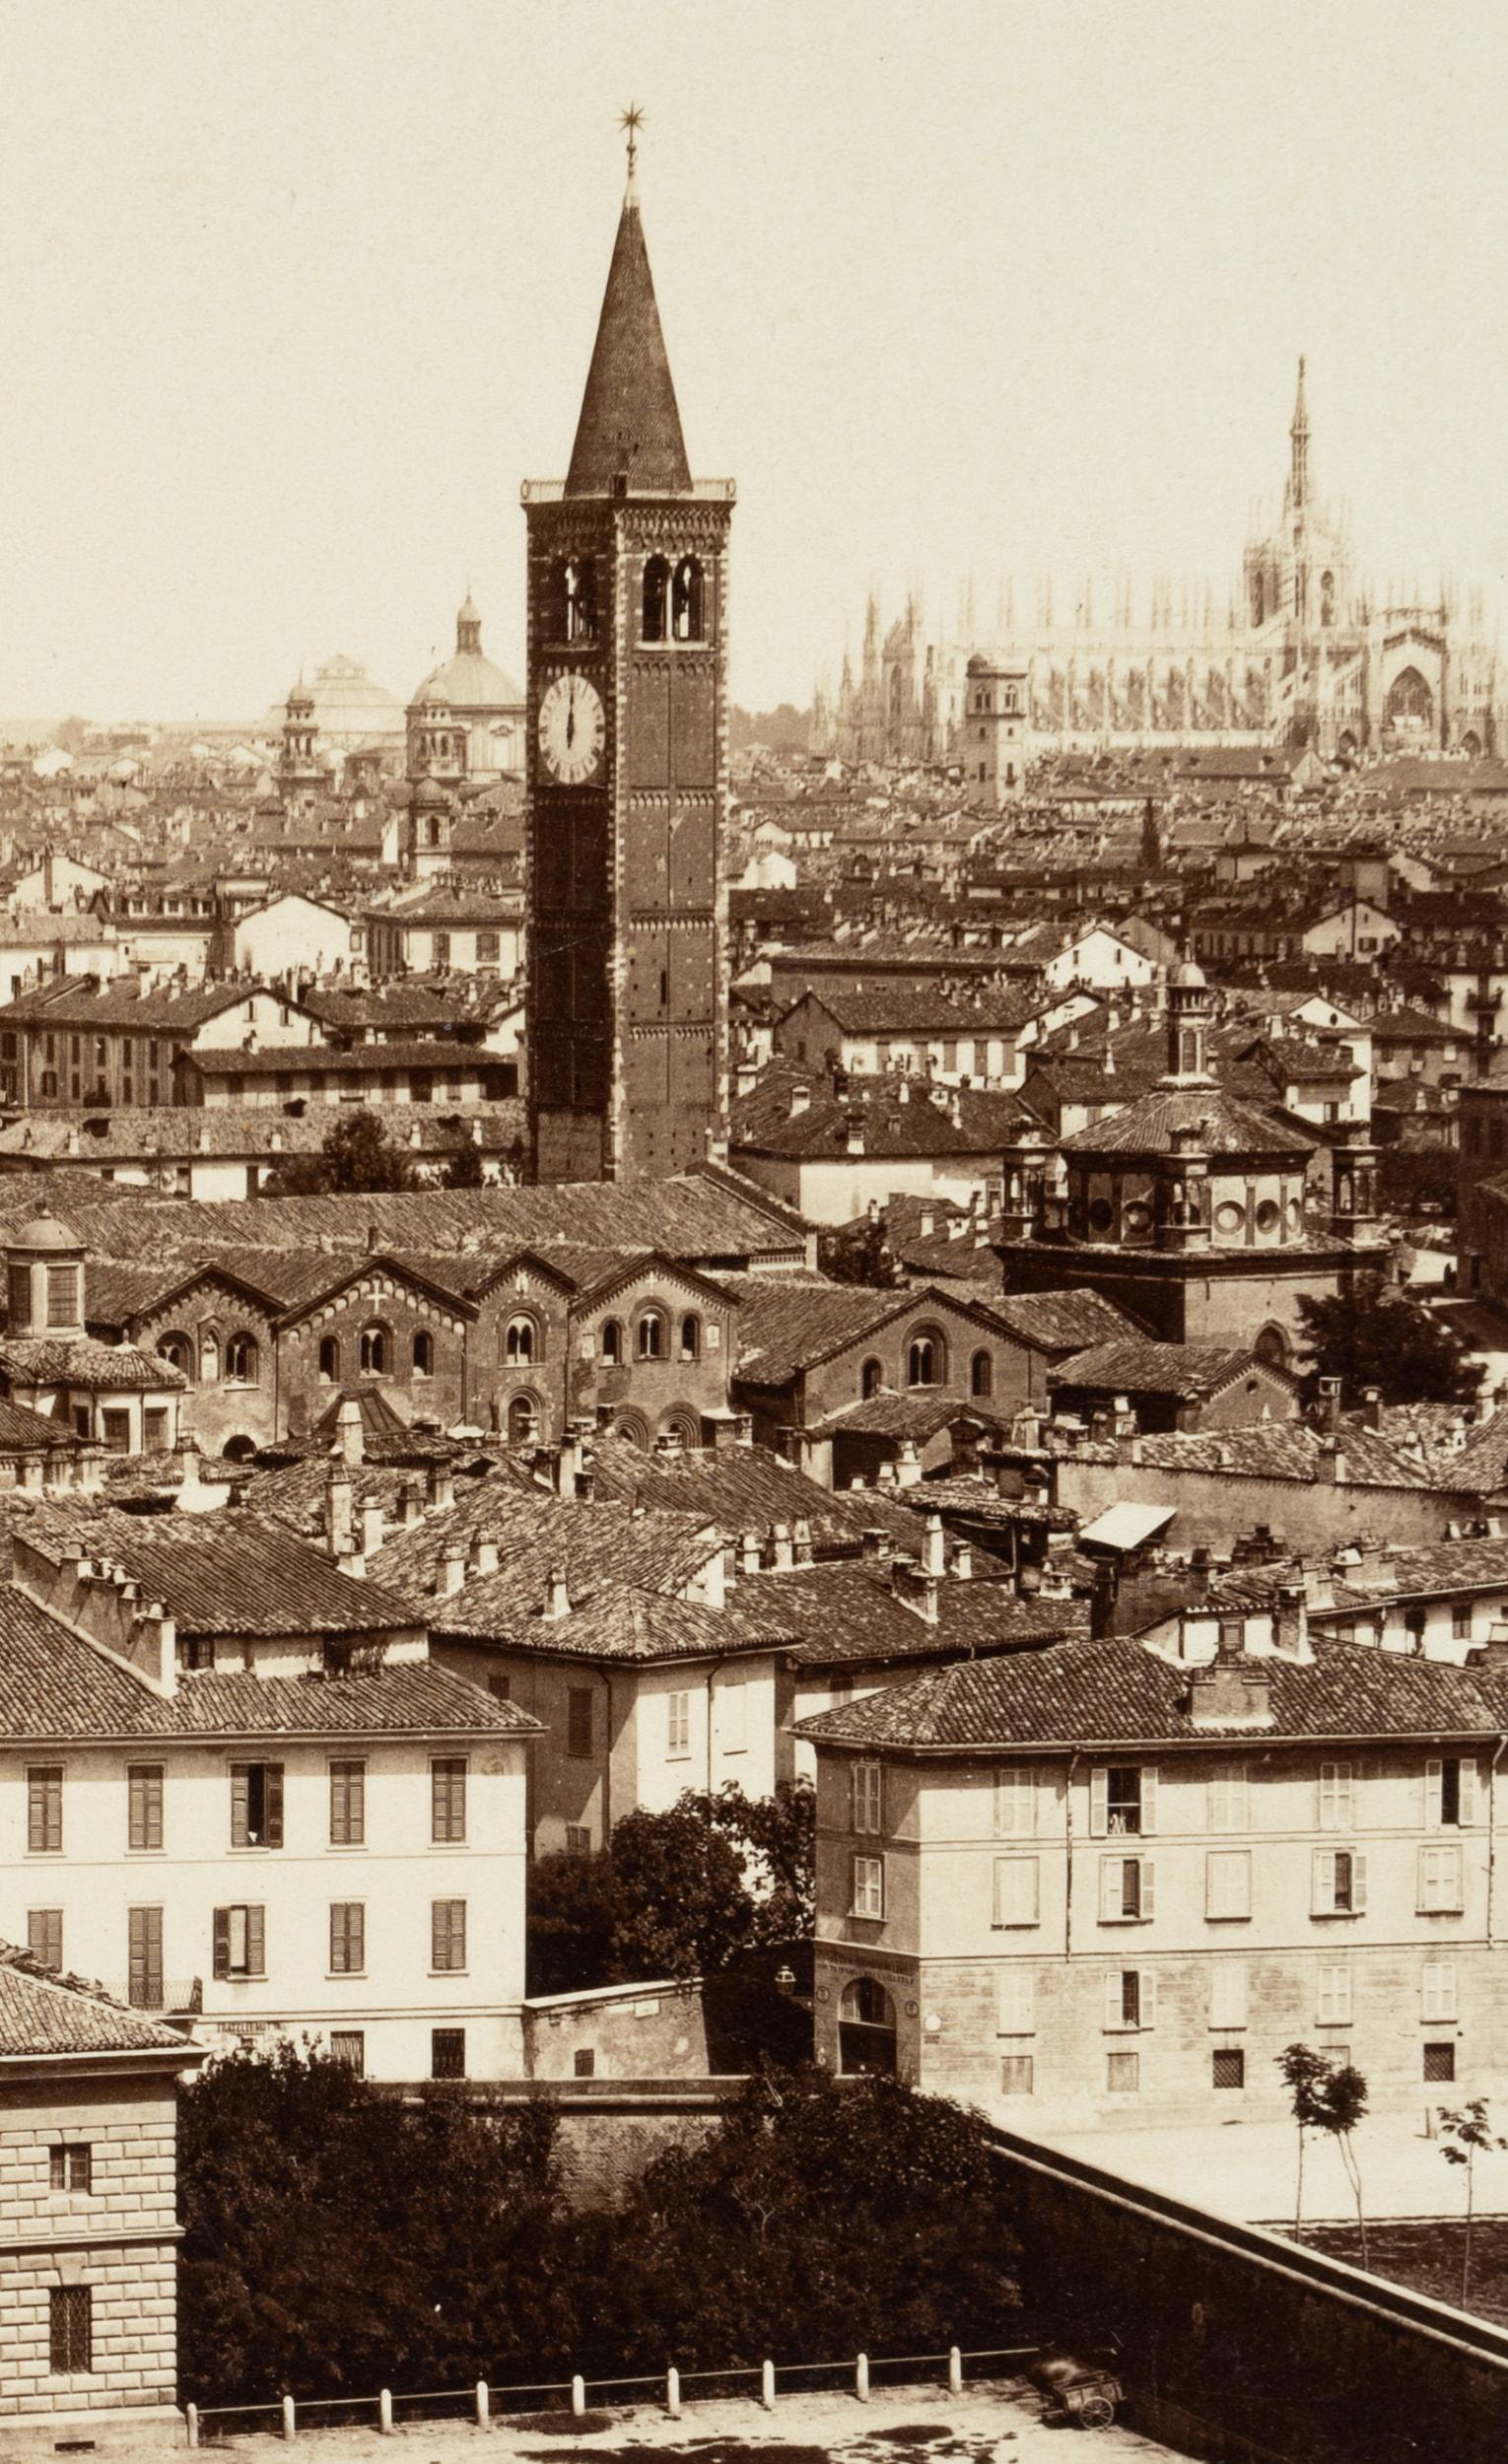 Giorgio Sommer (1834 Frankfurt on the Main - 1914 Naples) Circle: Historic Italy, View of Milan, c. 1880, albumen paper print

Technique: albumen paper print, mounted on Cardboard

Inscription: At the lower part inscribed on the support: 